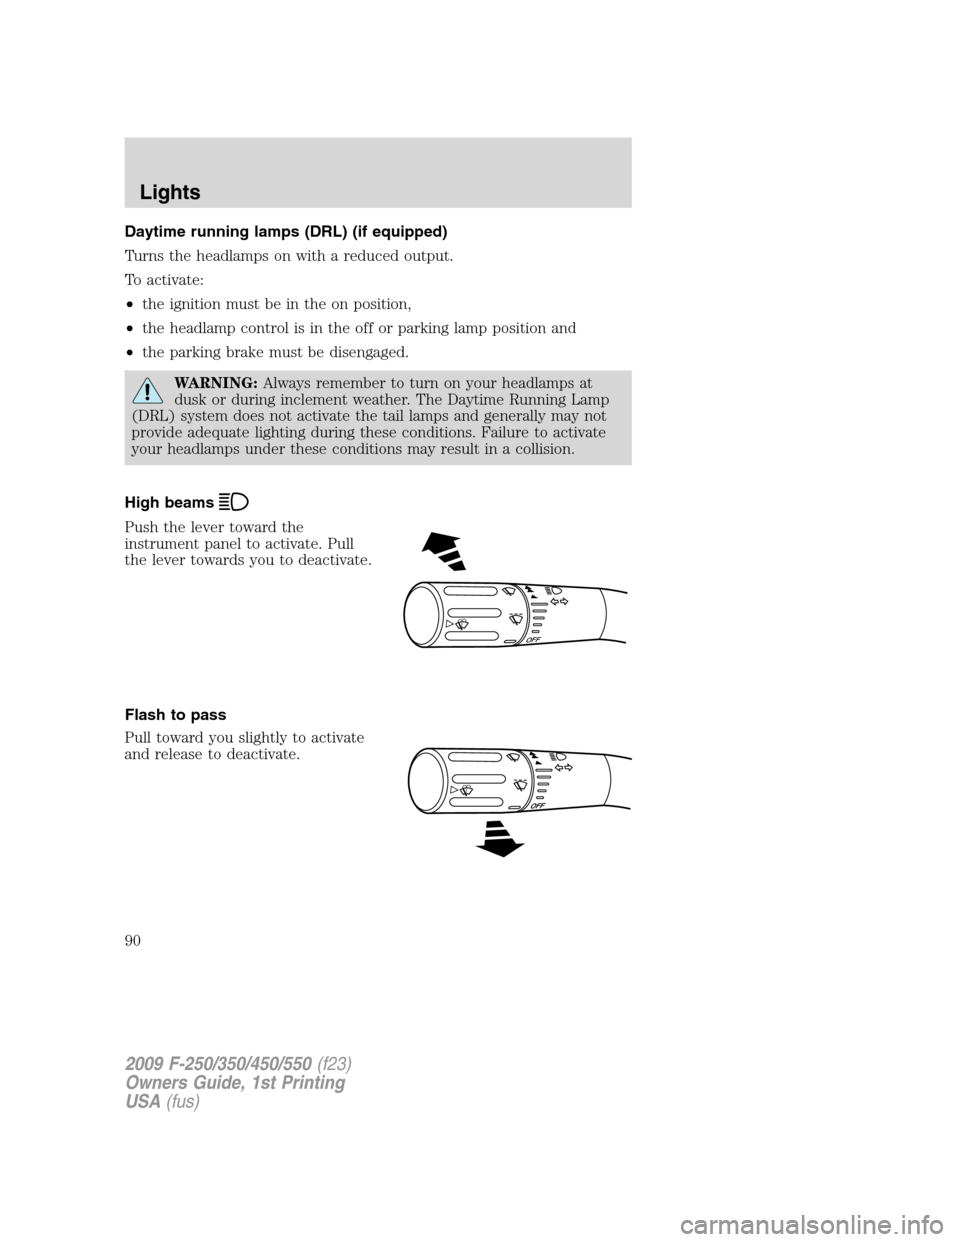 FORD SUPER DUTY 2009 2.G Owners Manual Daytime running lamps (DRL) (if equipped)
Turns the headlamps on with a reduced output.
To activate:
•the ignition must be in the on position,
•the headlamp control is in the off or parking lamp p